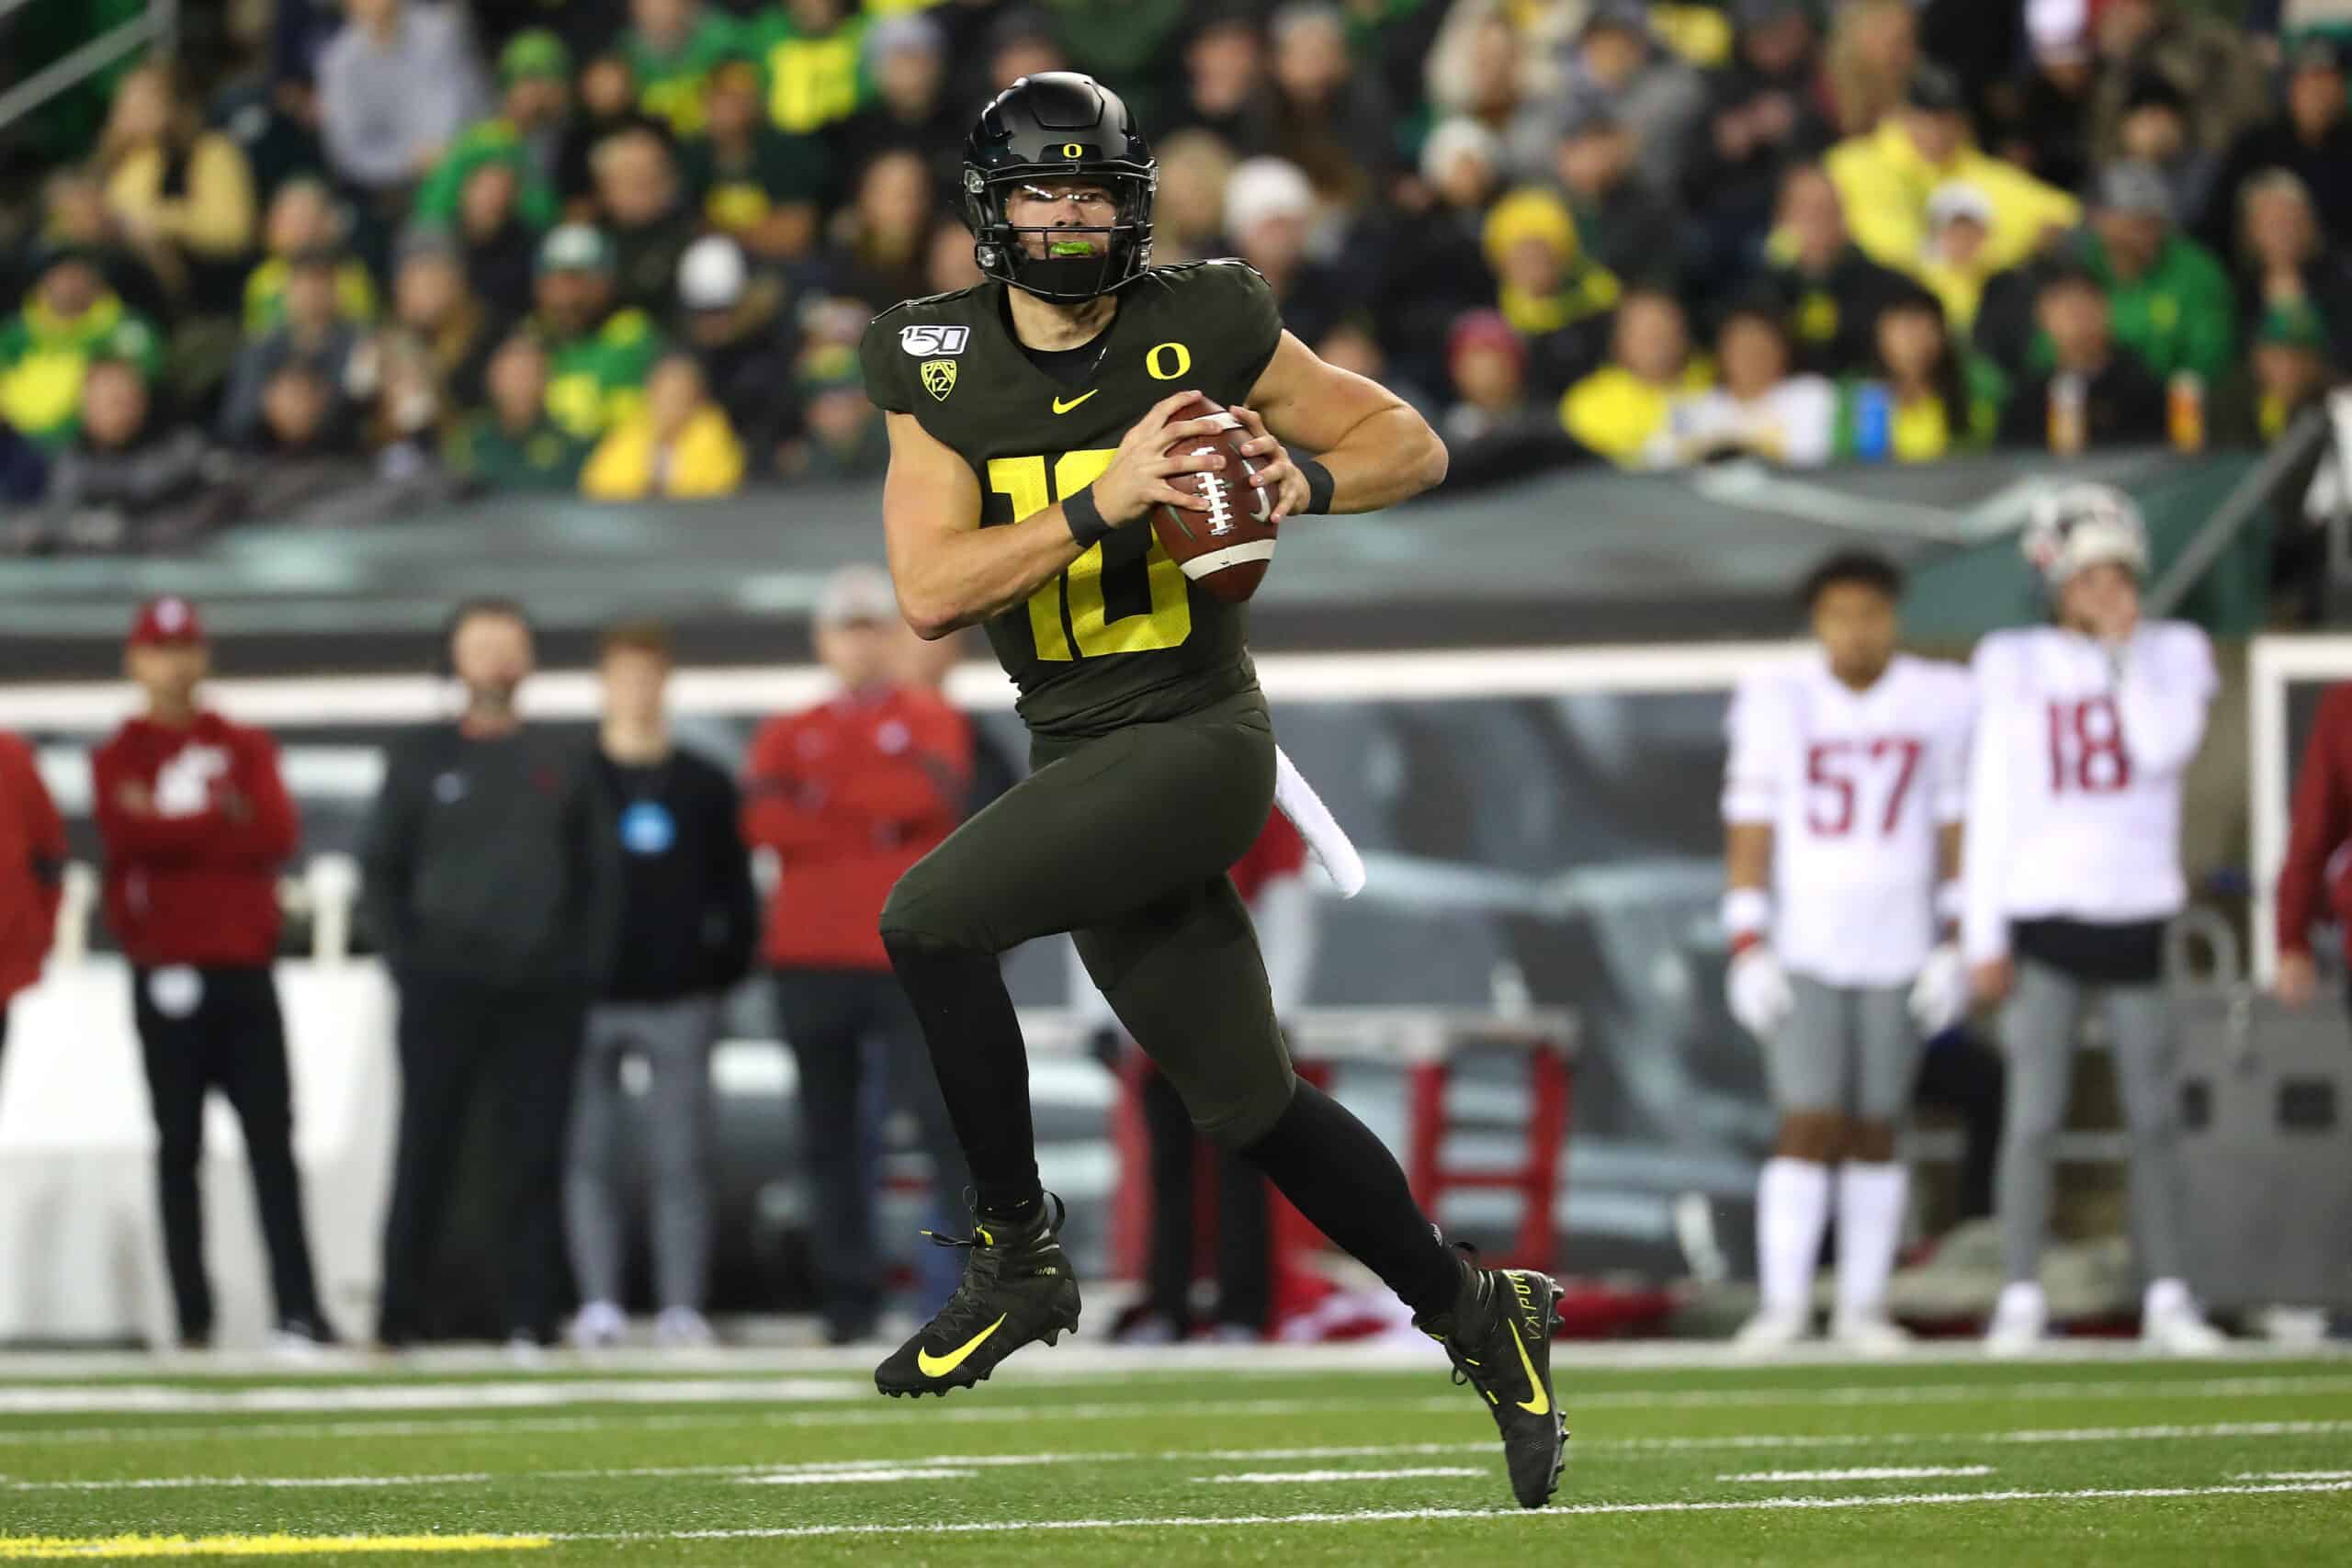 EUGENE, OREGON - OCTOBER 26: Justin Herbert #10 of the Oregon Ducks looks to throw the ball in the first quarter against the Washington State Cougars during their game at Autzen Stadium on October 26, 2019 in Eugene, Oregon. (Photo by Abbie Parr/Getty Images)